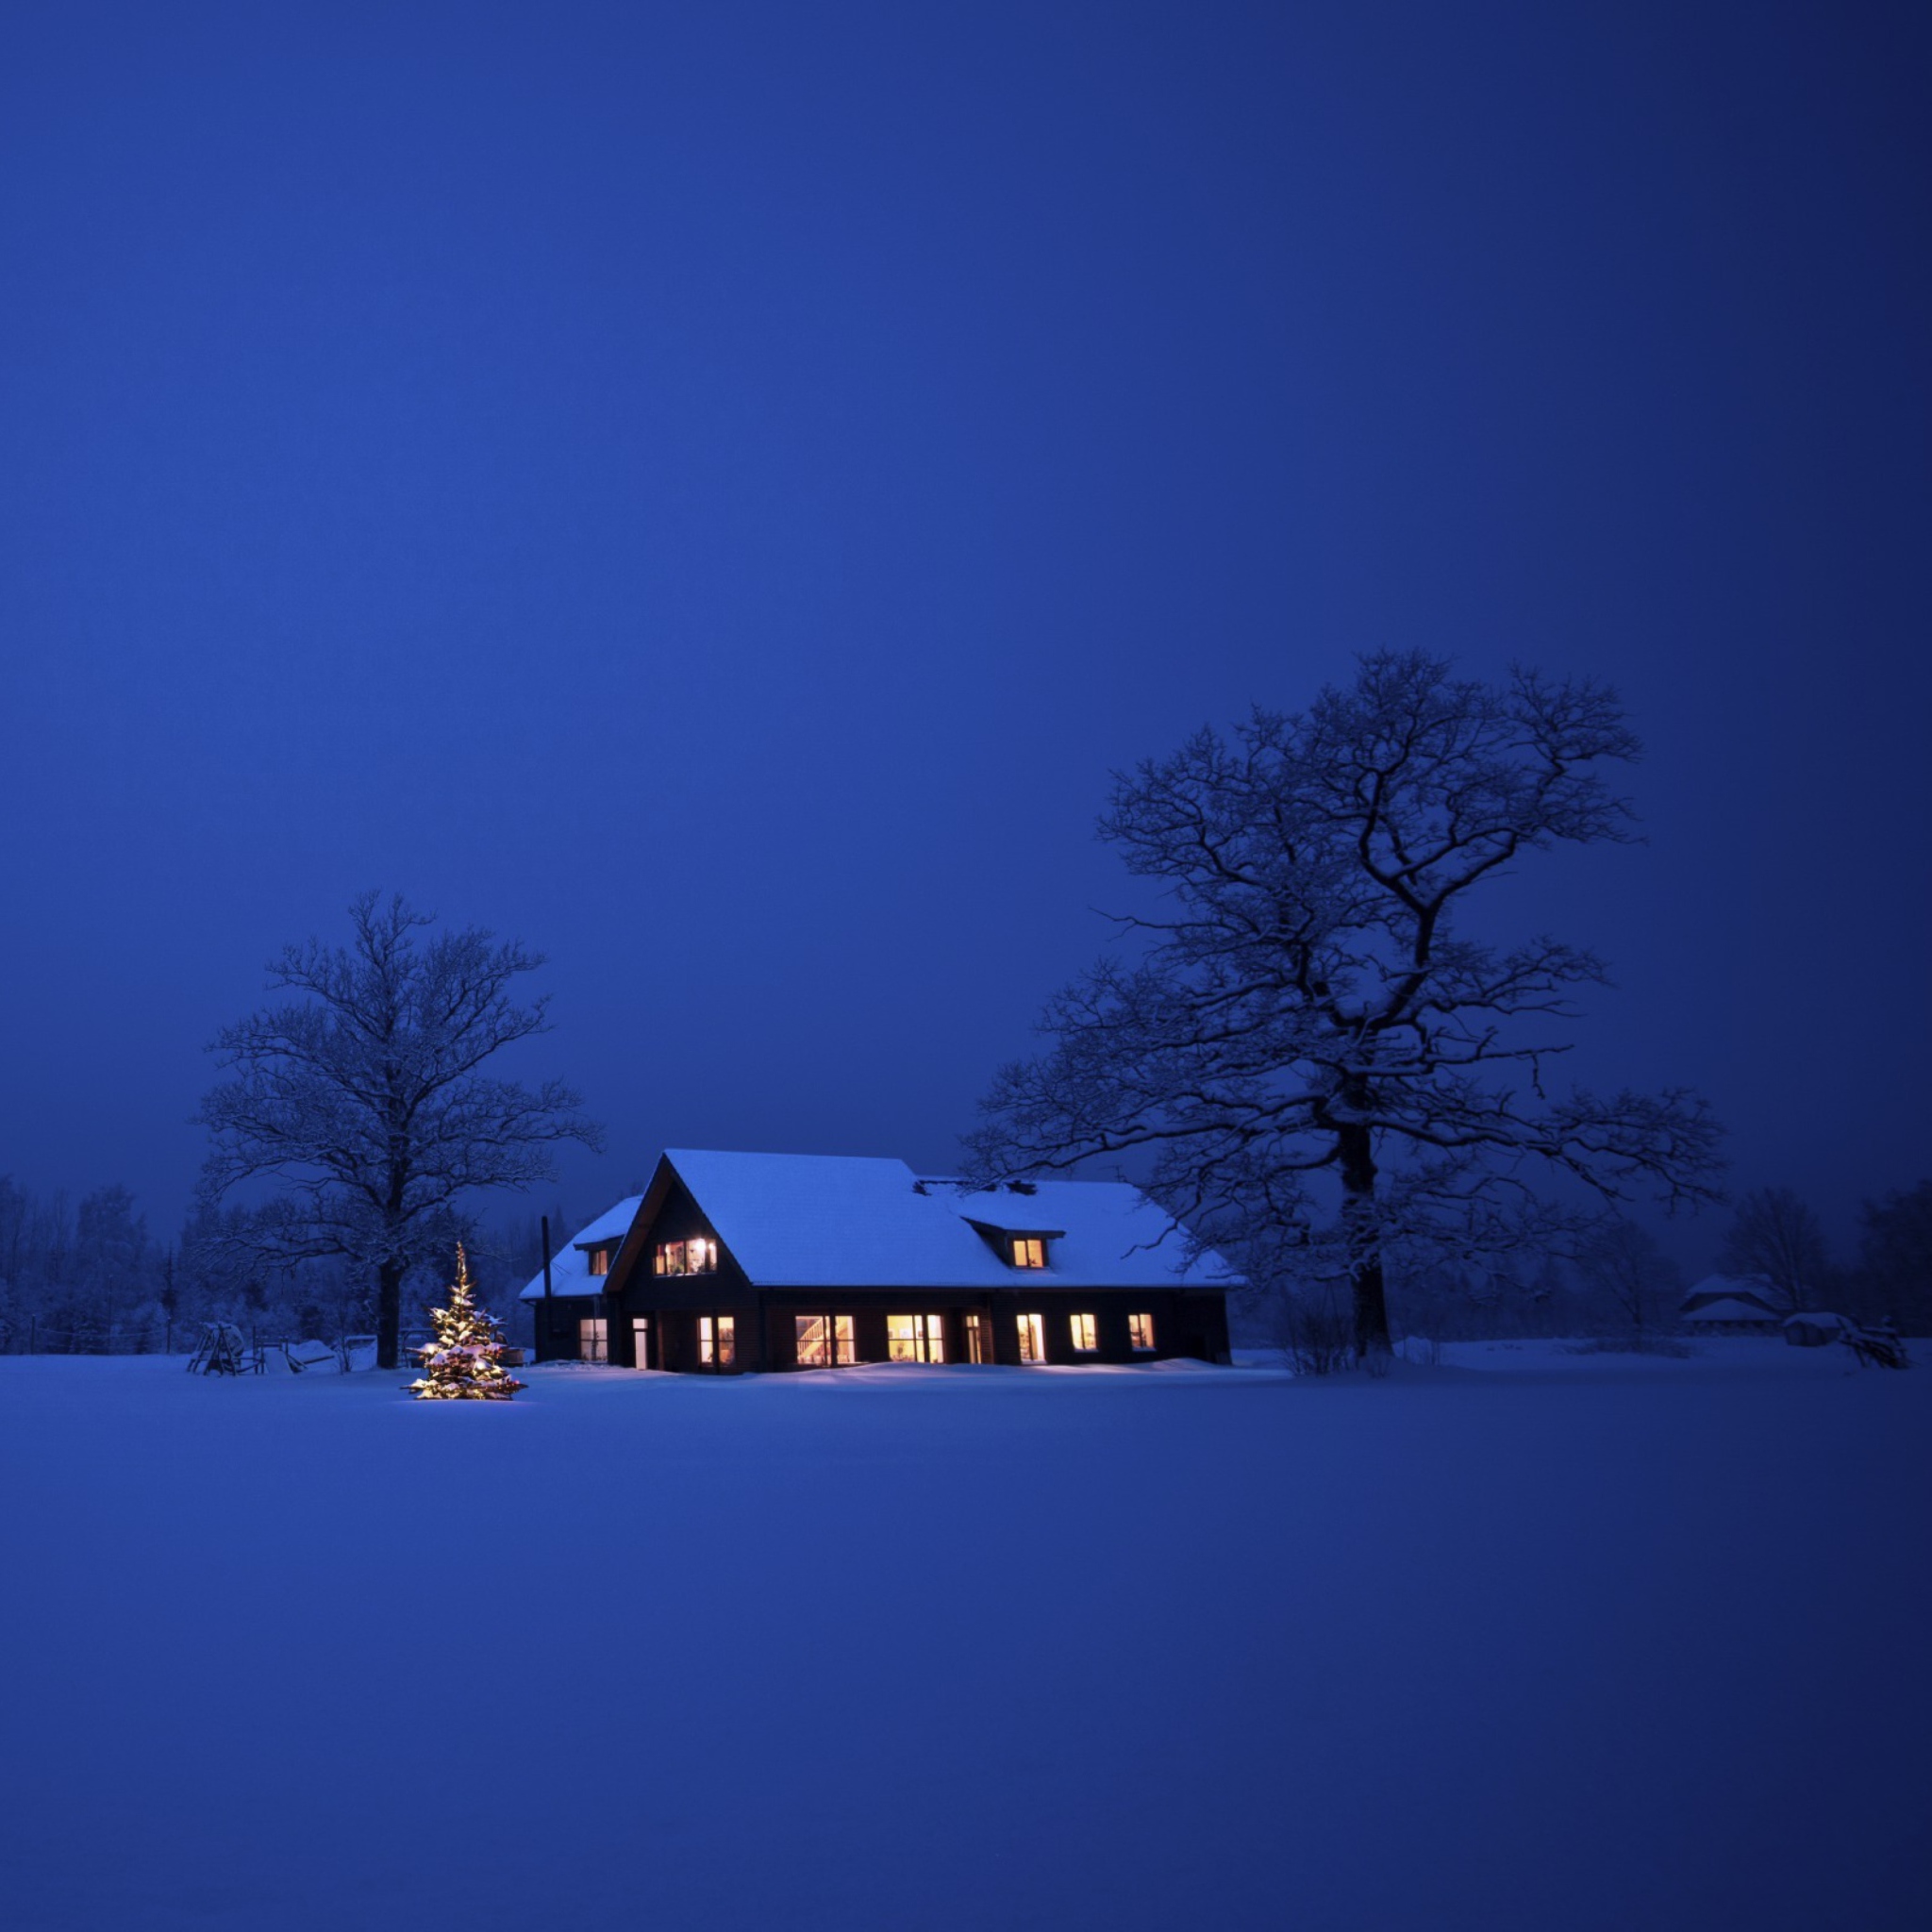 Lonely House, Winter Landscape And Christmas Tree wallpaper 2048x2048